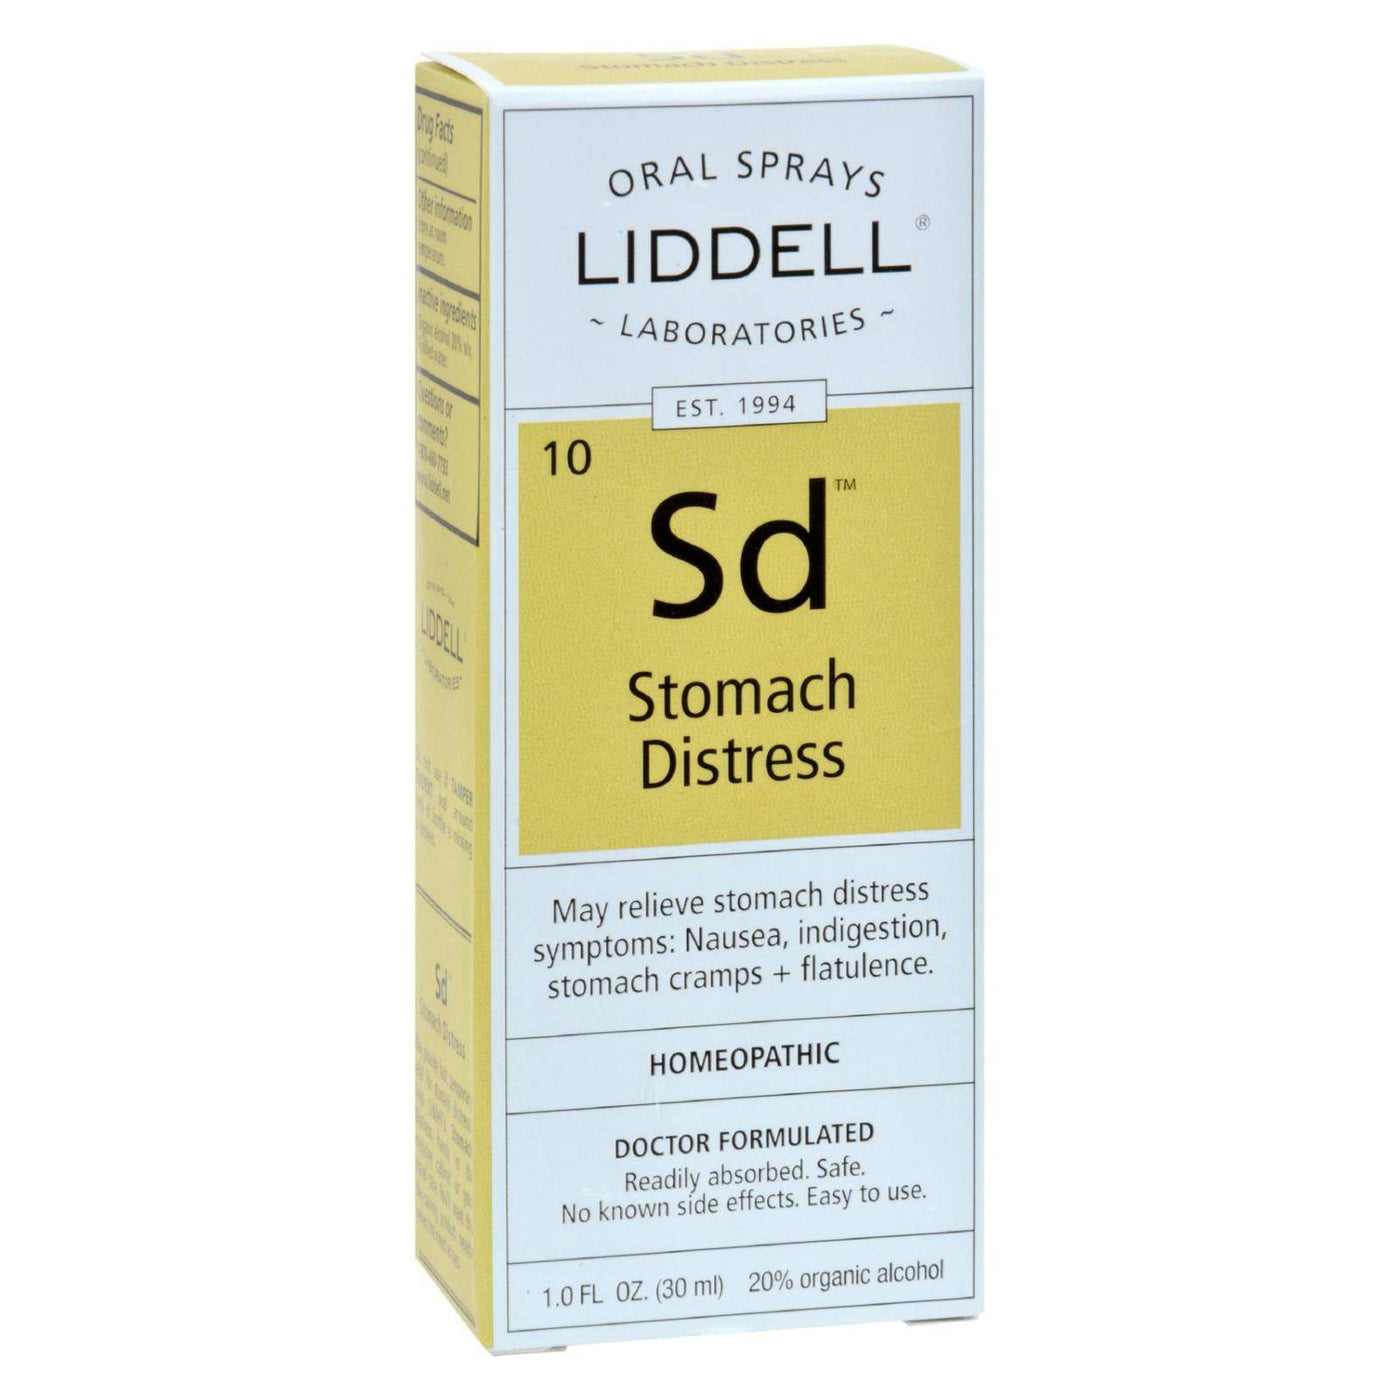 Liddell Homeopathic Stomach Distress - 1 Fl Oz | OnlyNaturals.us